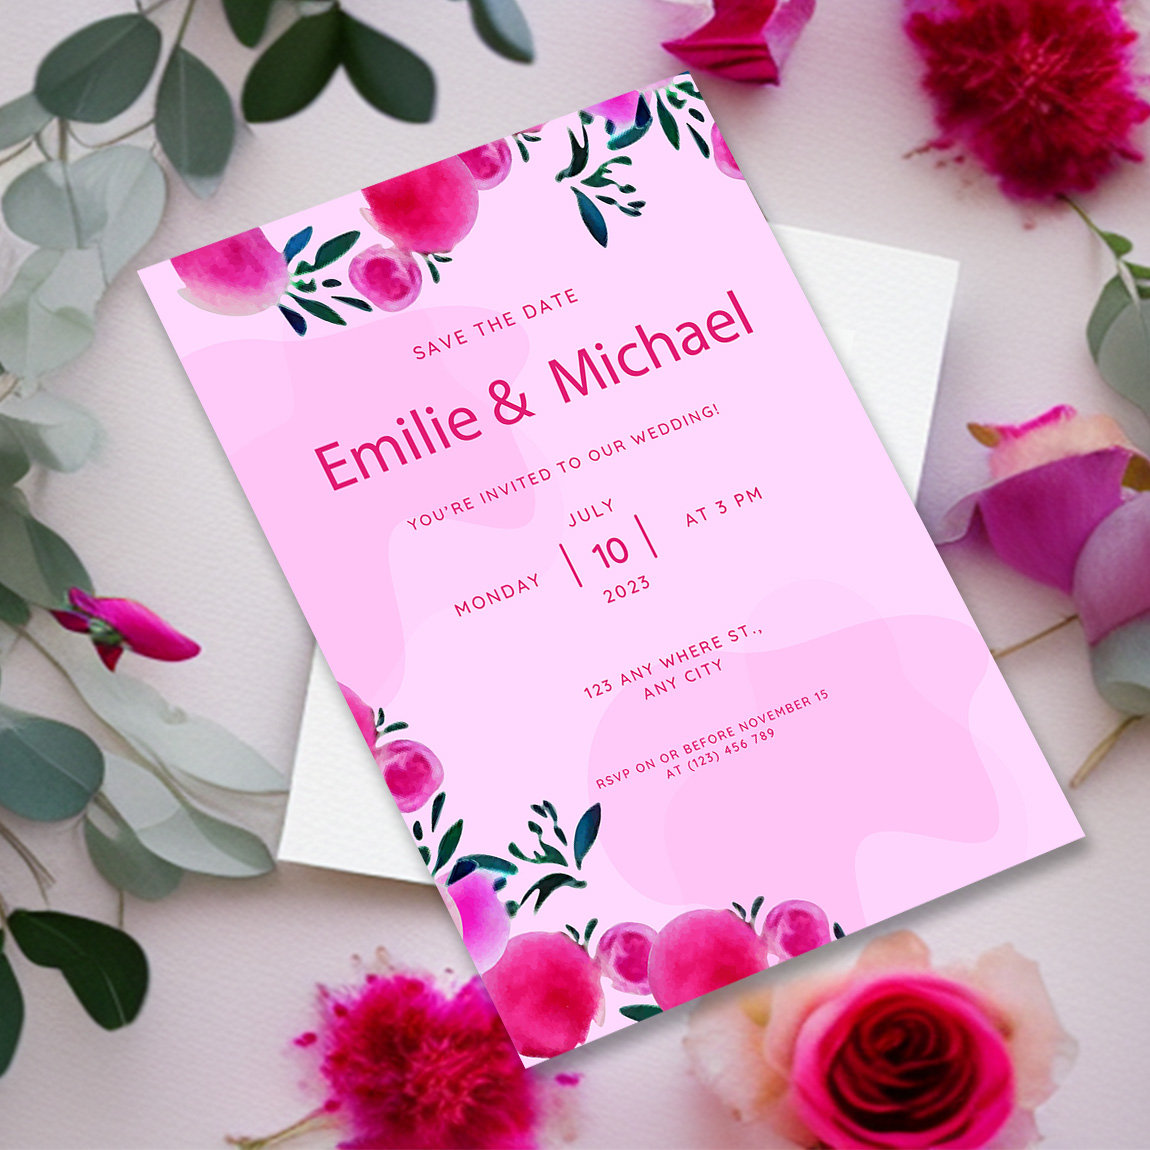 Image with exquisite wedding invitation card with flowers in pink color.